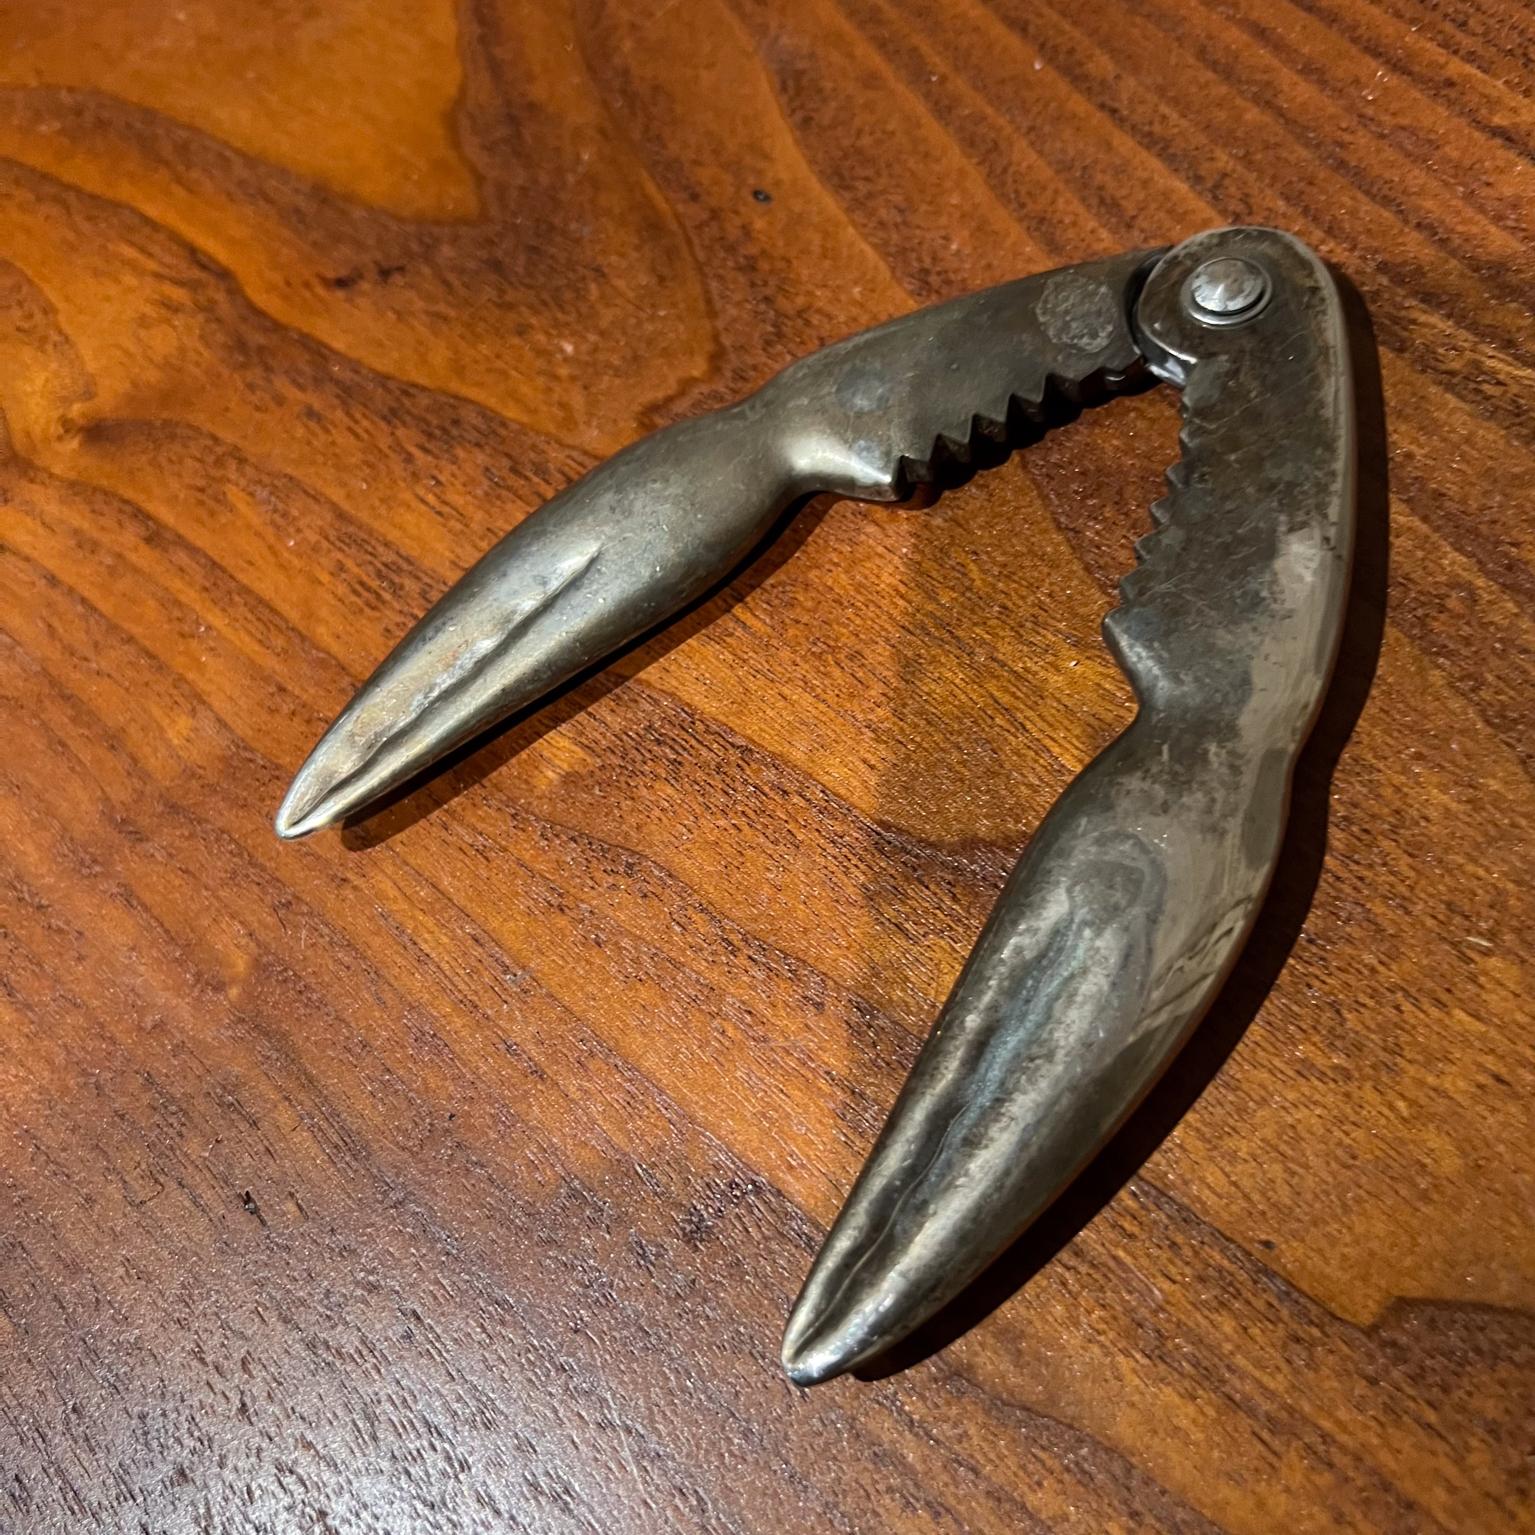 Midcentury Modern Vintage Crab Cracker Tool In Good Condition For Sale In Chula Vista, CA